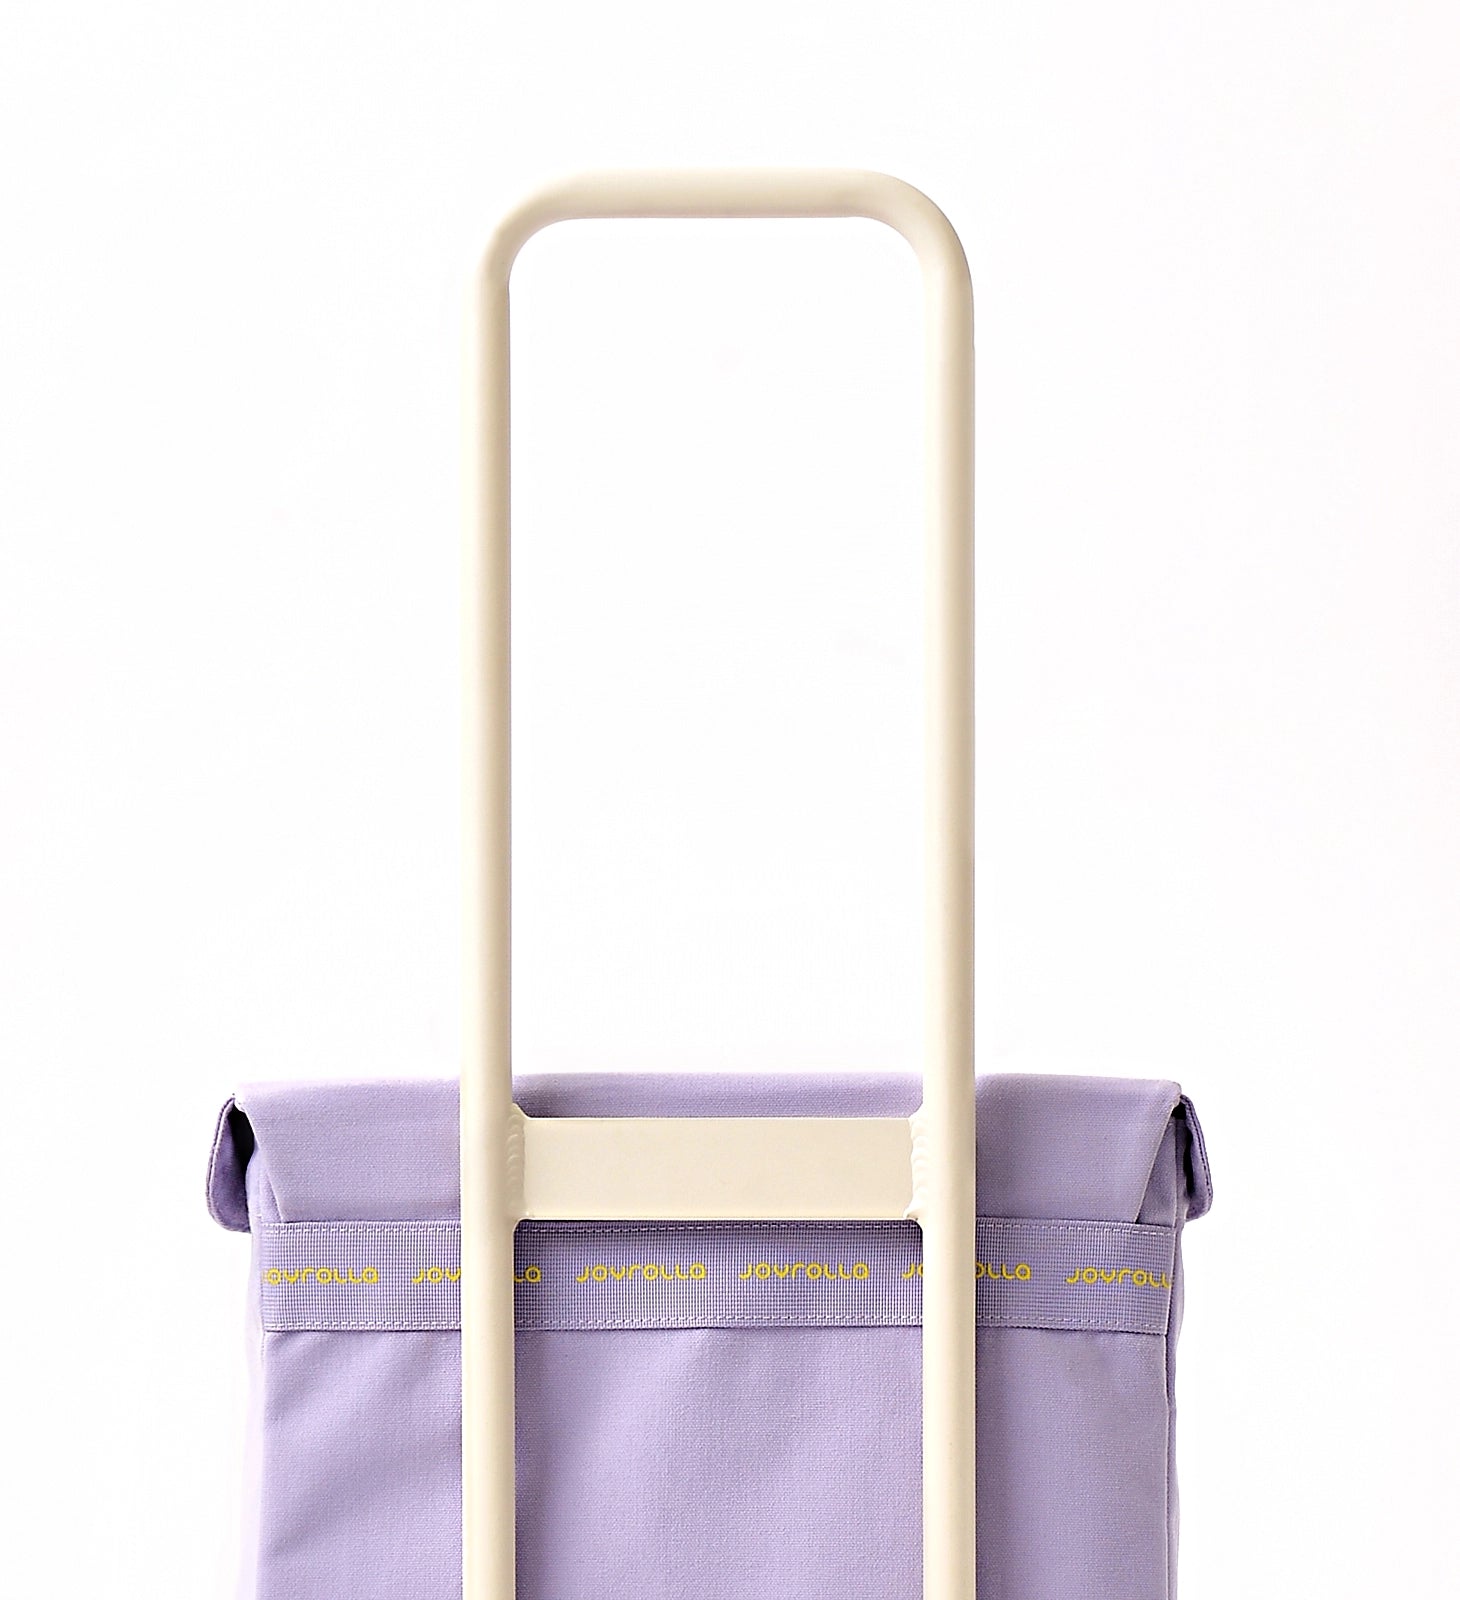 A close up view of the Joyrolla Cart and bag featuring logo repeats in yellow. 